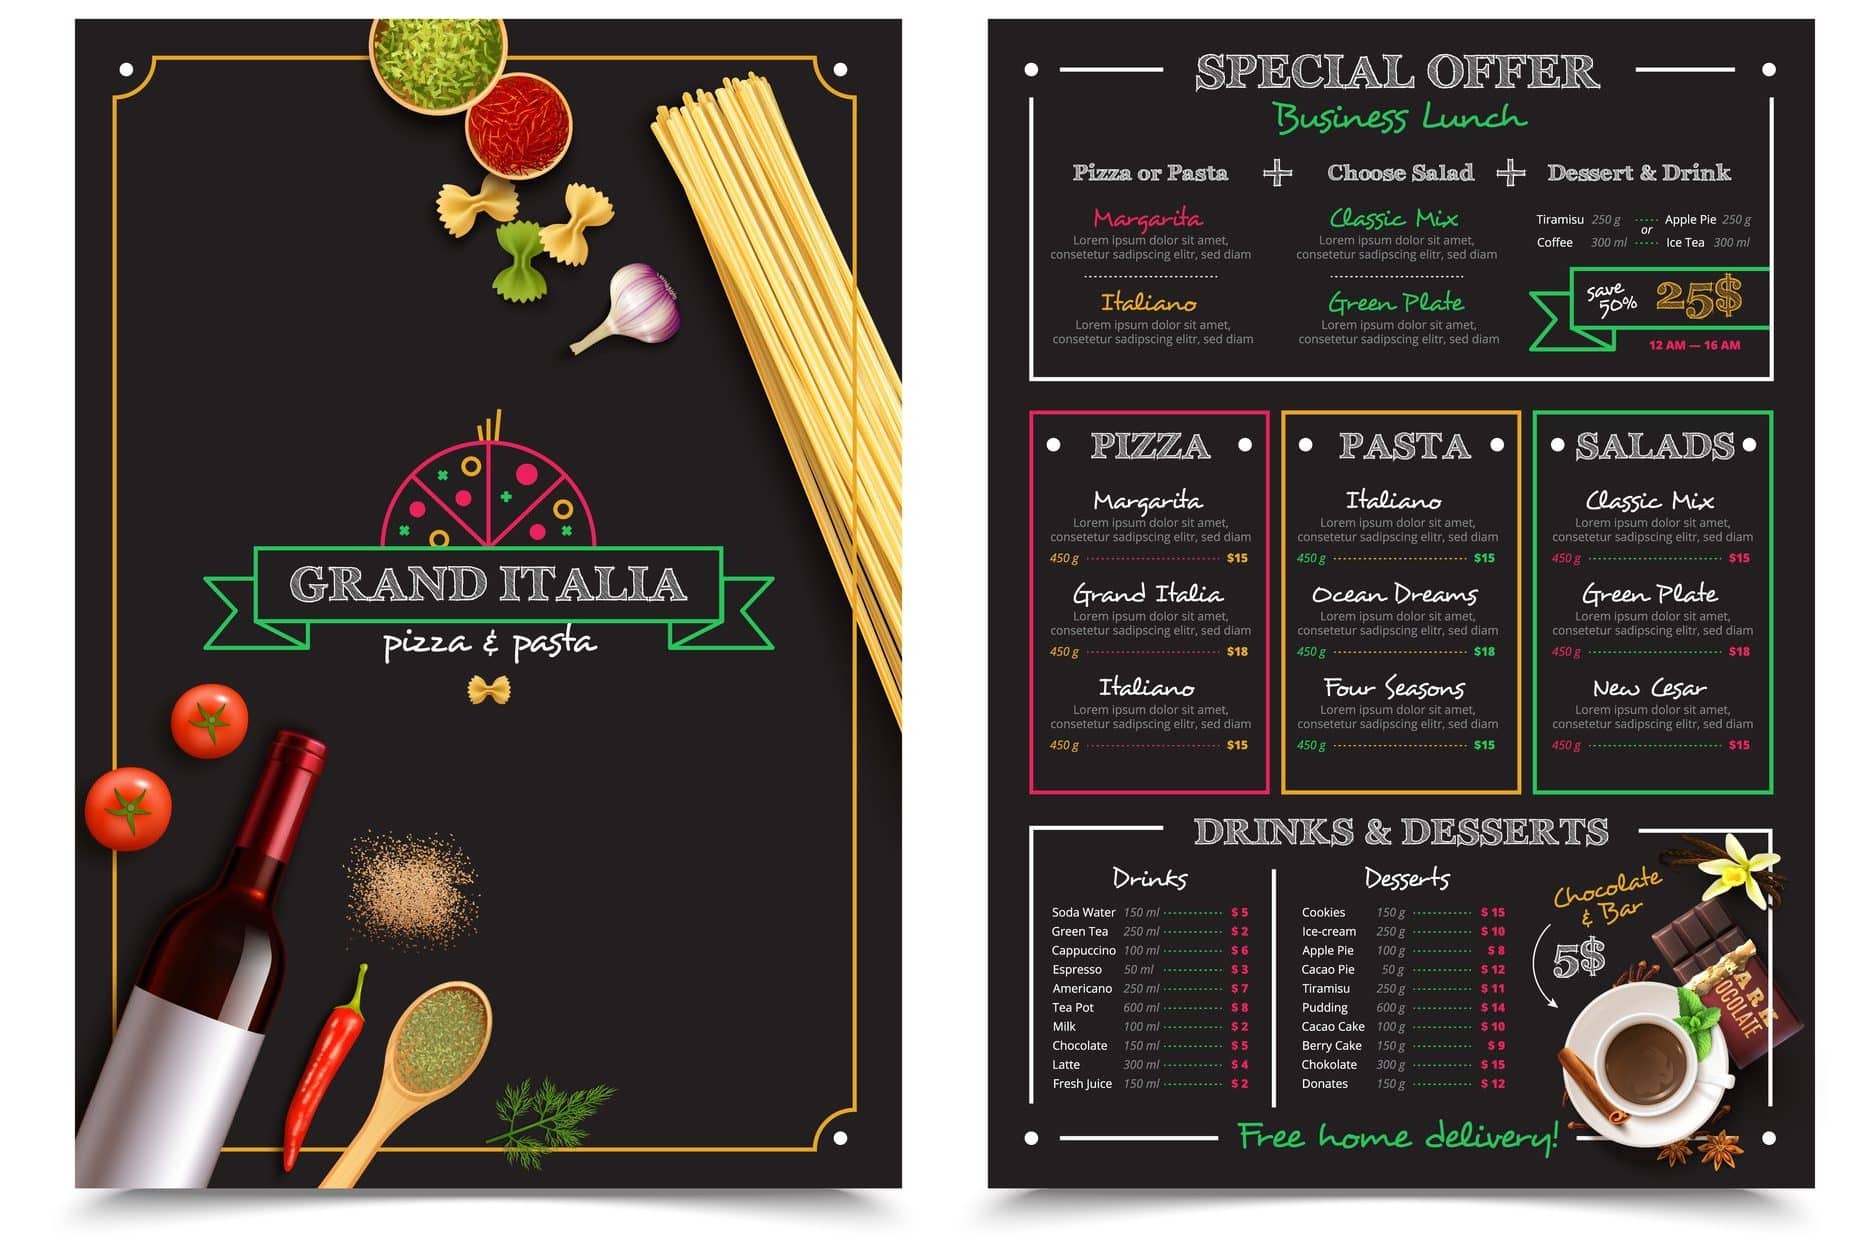 Italian restaurant menu with special offer for business lunch design elements on black background isolated vector illustration